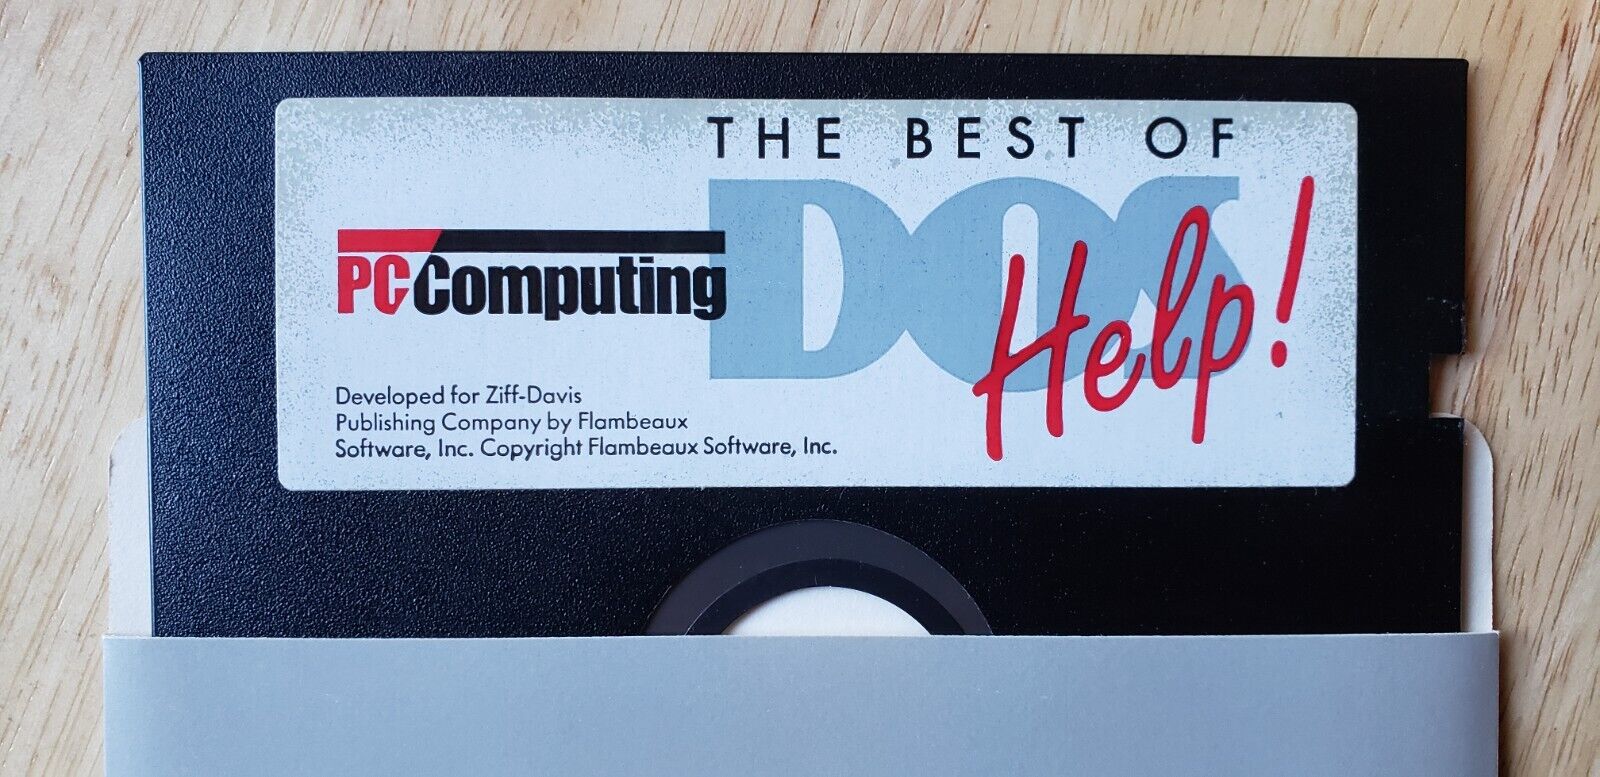 PC Computing  The Best of DOS HELP 